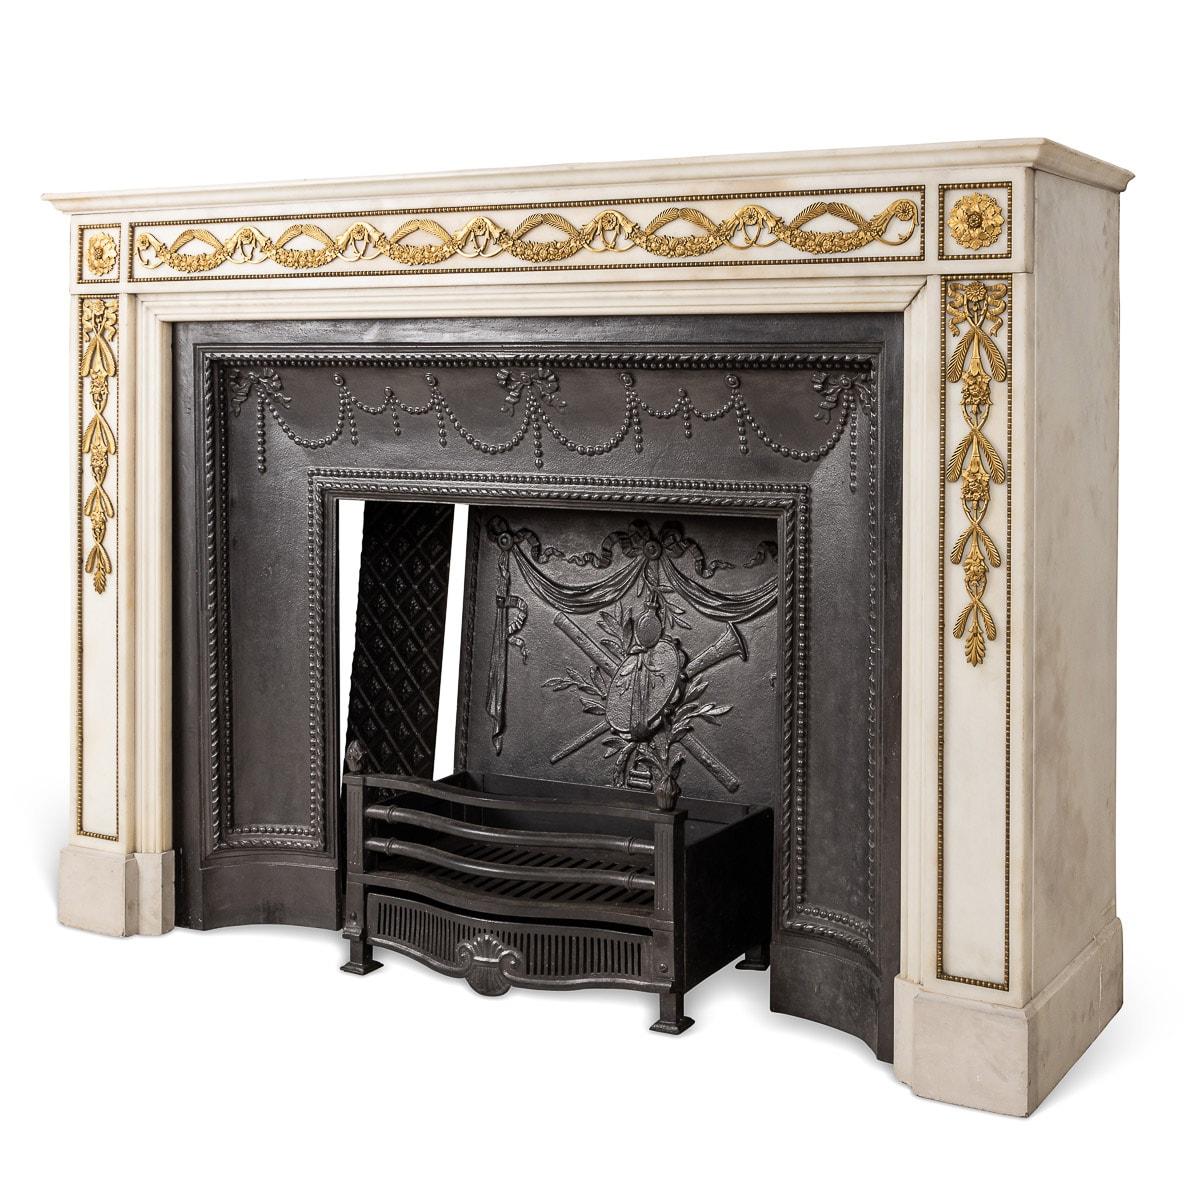 Antique mid-19th century French Empire white marble fireplace with ormolu mounts. The moulded panelled jambs applied with gilt bronze laurel foliage swags with rosettes on each corner, fitted with the surround cast iron fire back, fire pit and